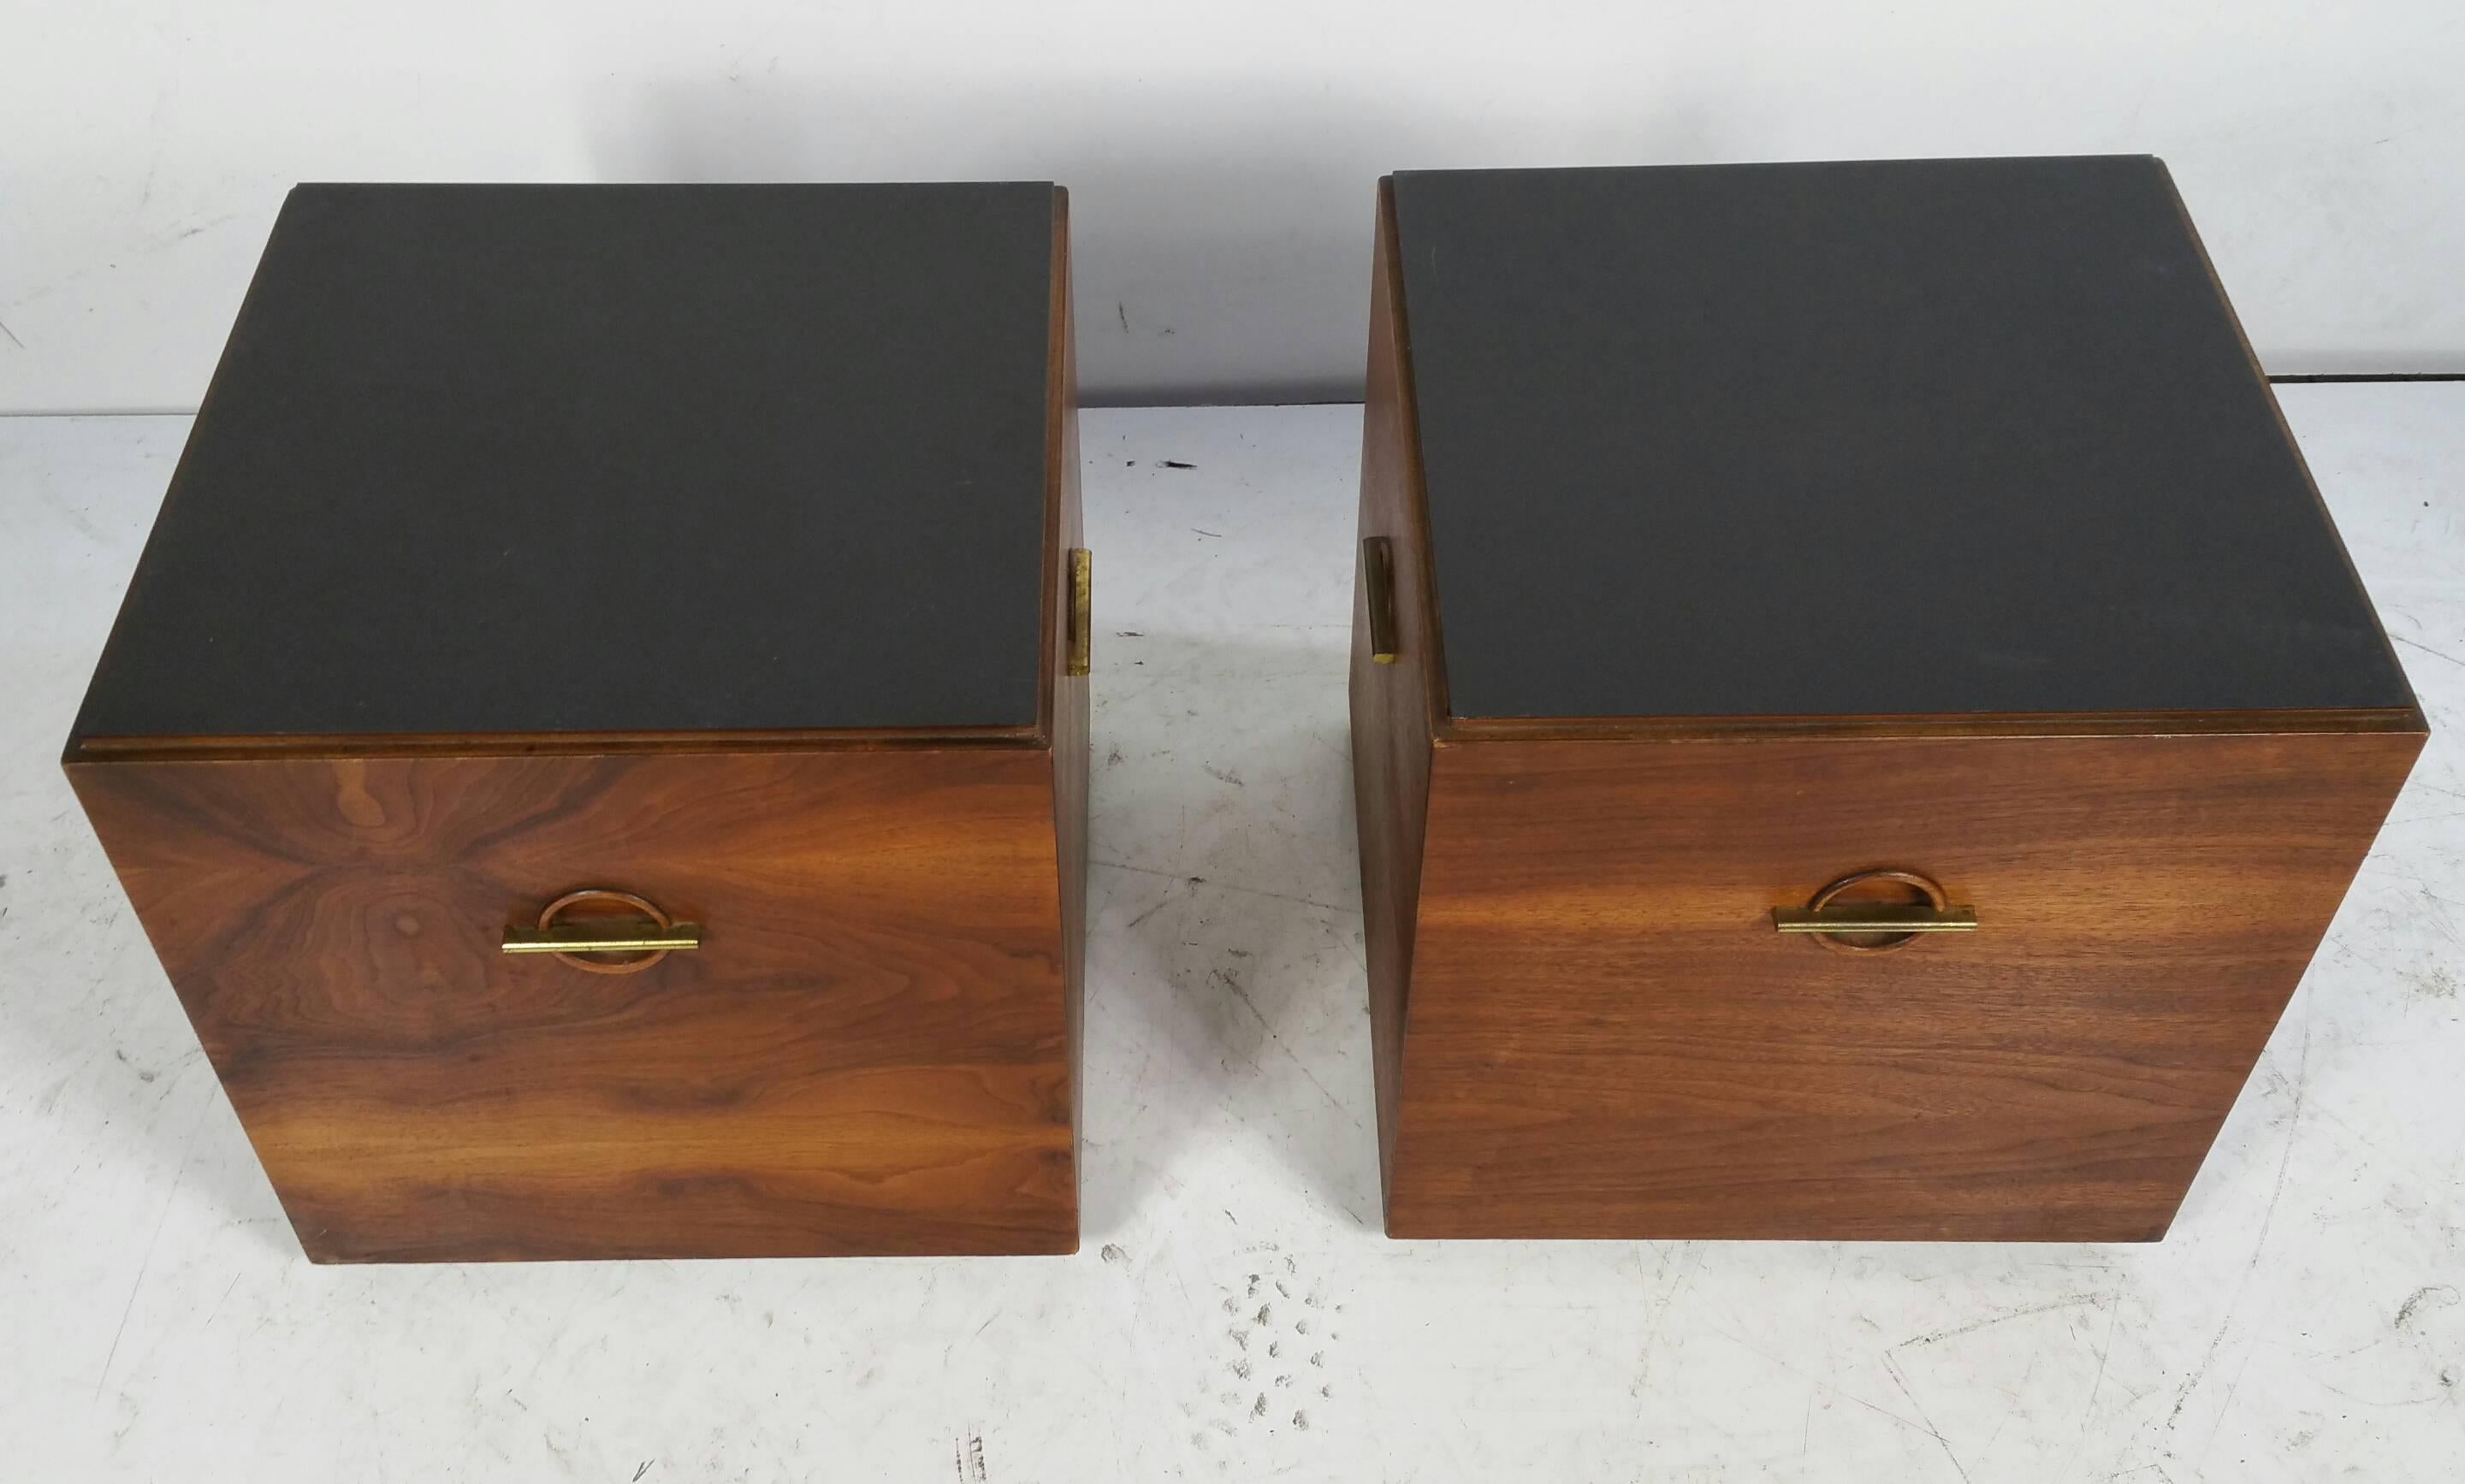 20th Century Midcentury Minimalist Cube Tables or Stands in Walnut and Brass by Lane For Sale